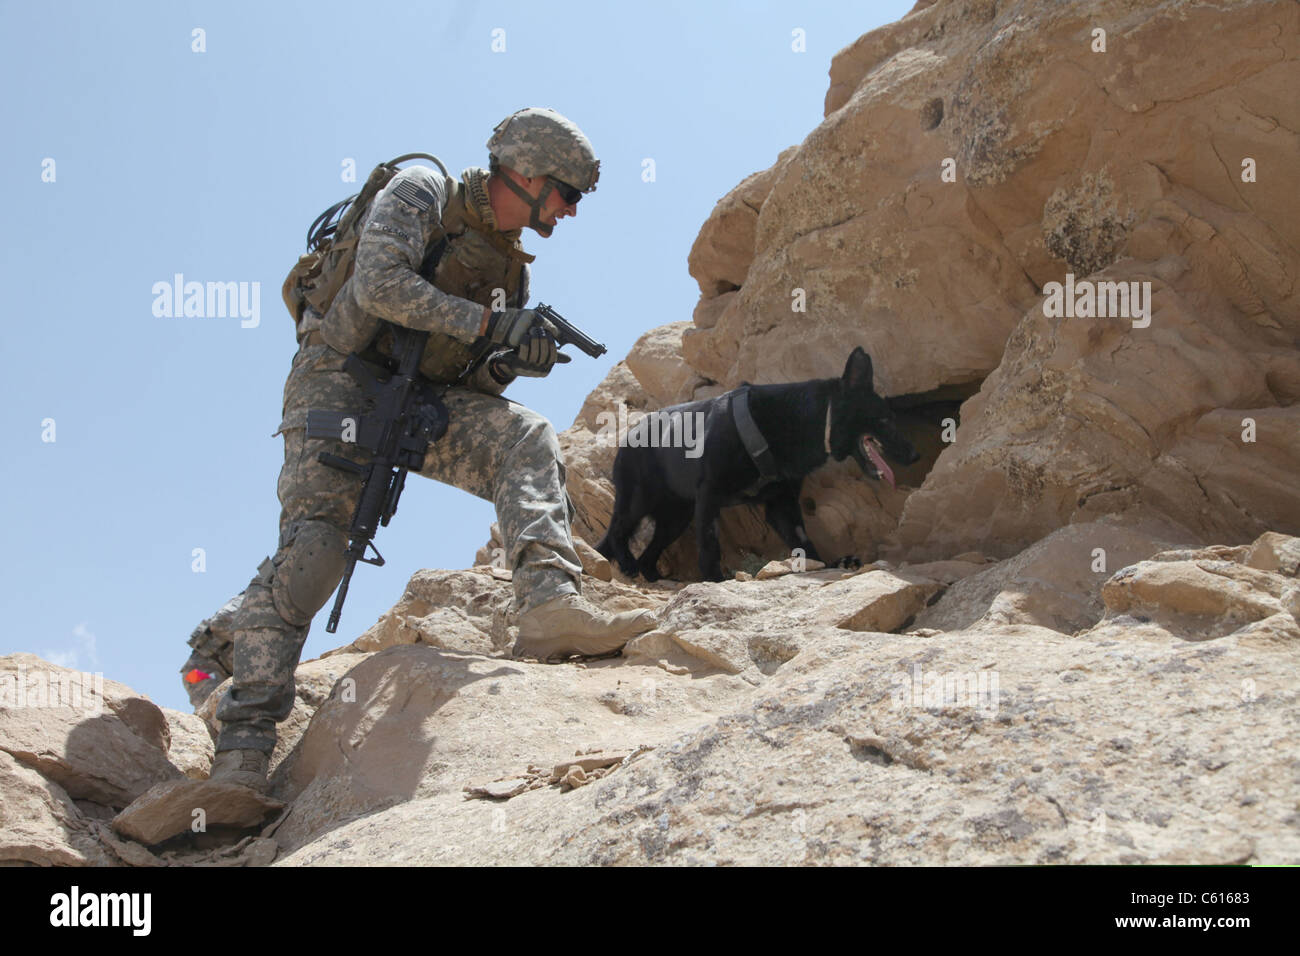 US soldier and Blek a working dog clear caves and search for weapons in the Zirat Mountain Area Afghanistan. July 7 2010. Stock Photo